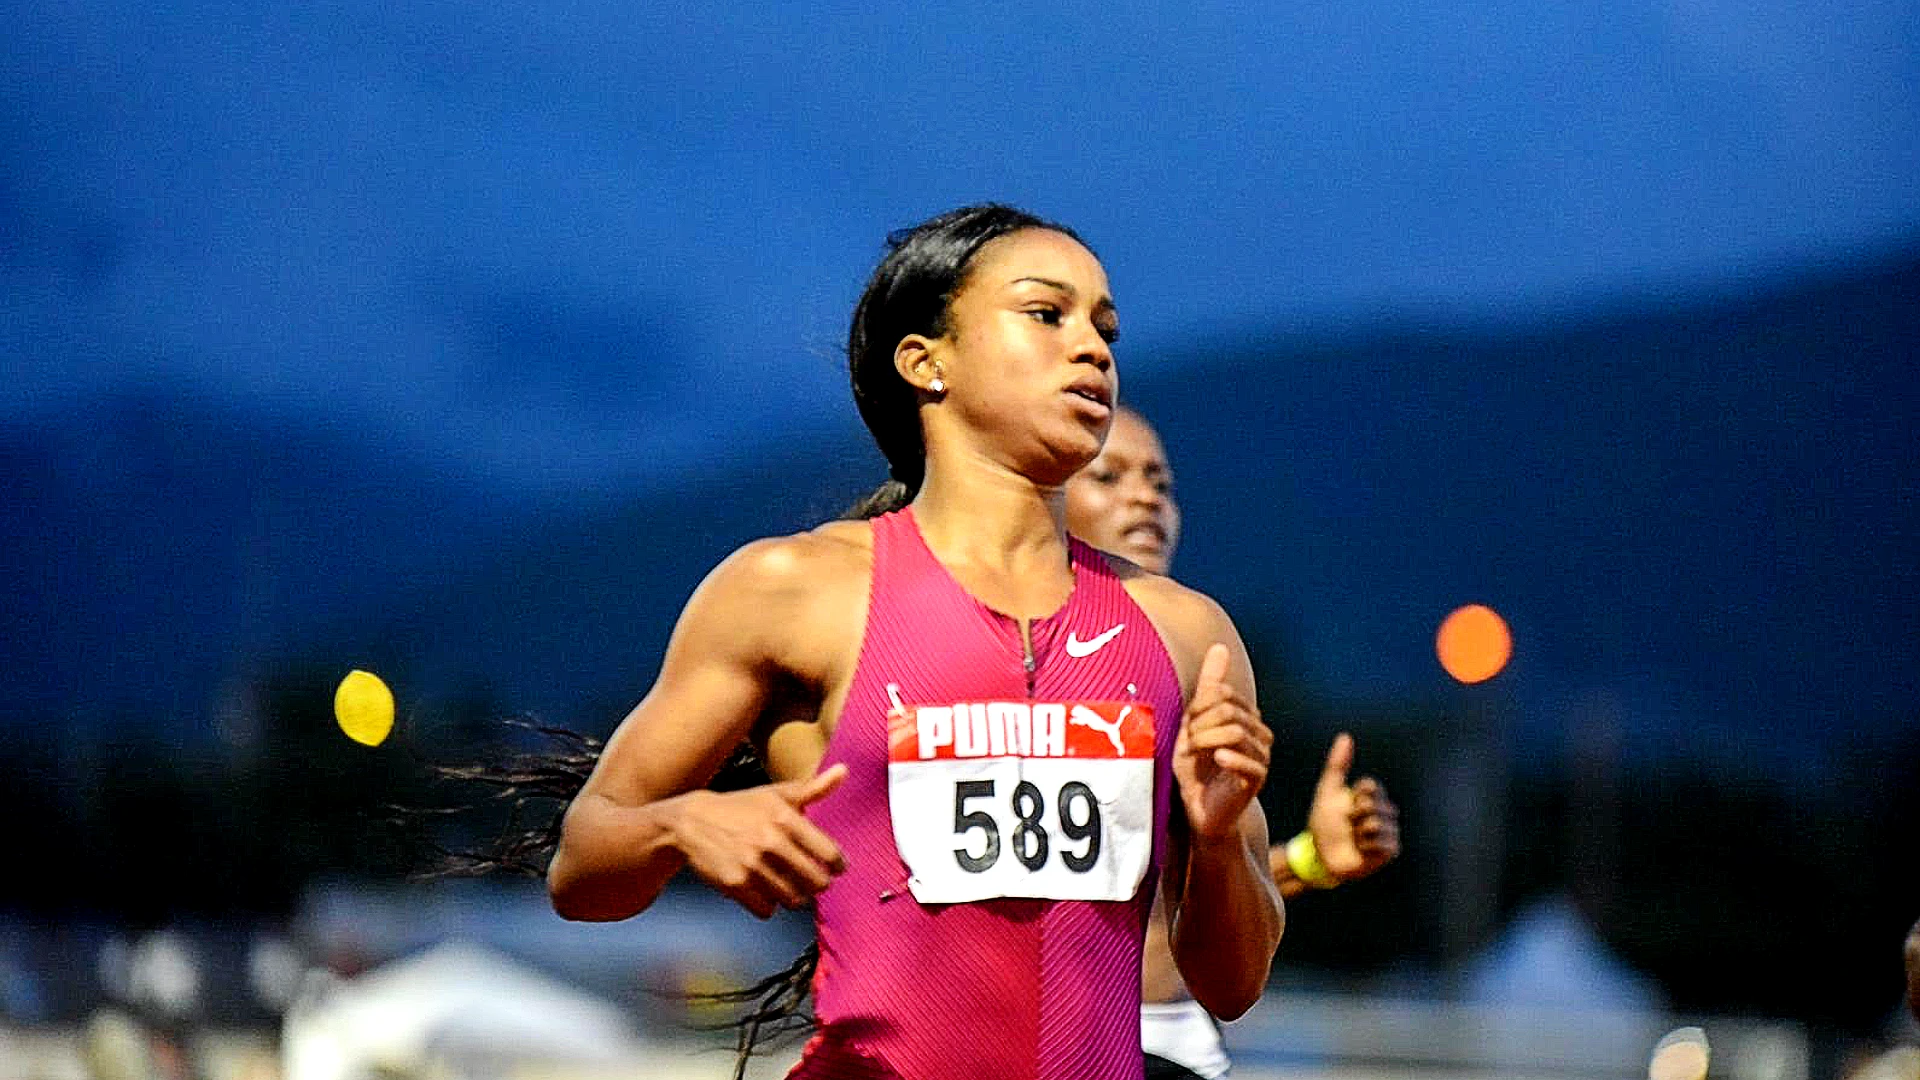 Confident Briana Williams says “I’ll be ready” after 10.97 in Kingston